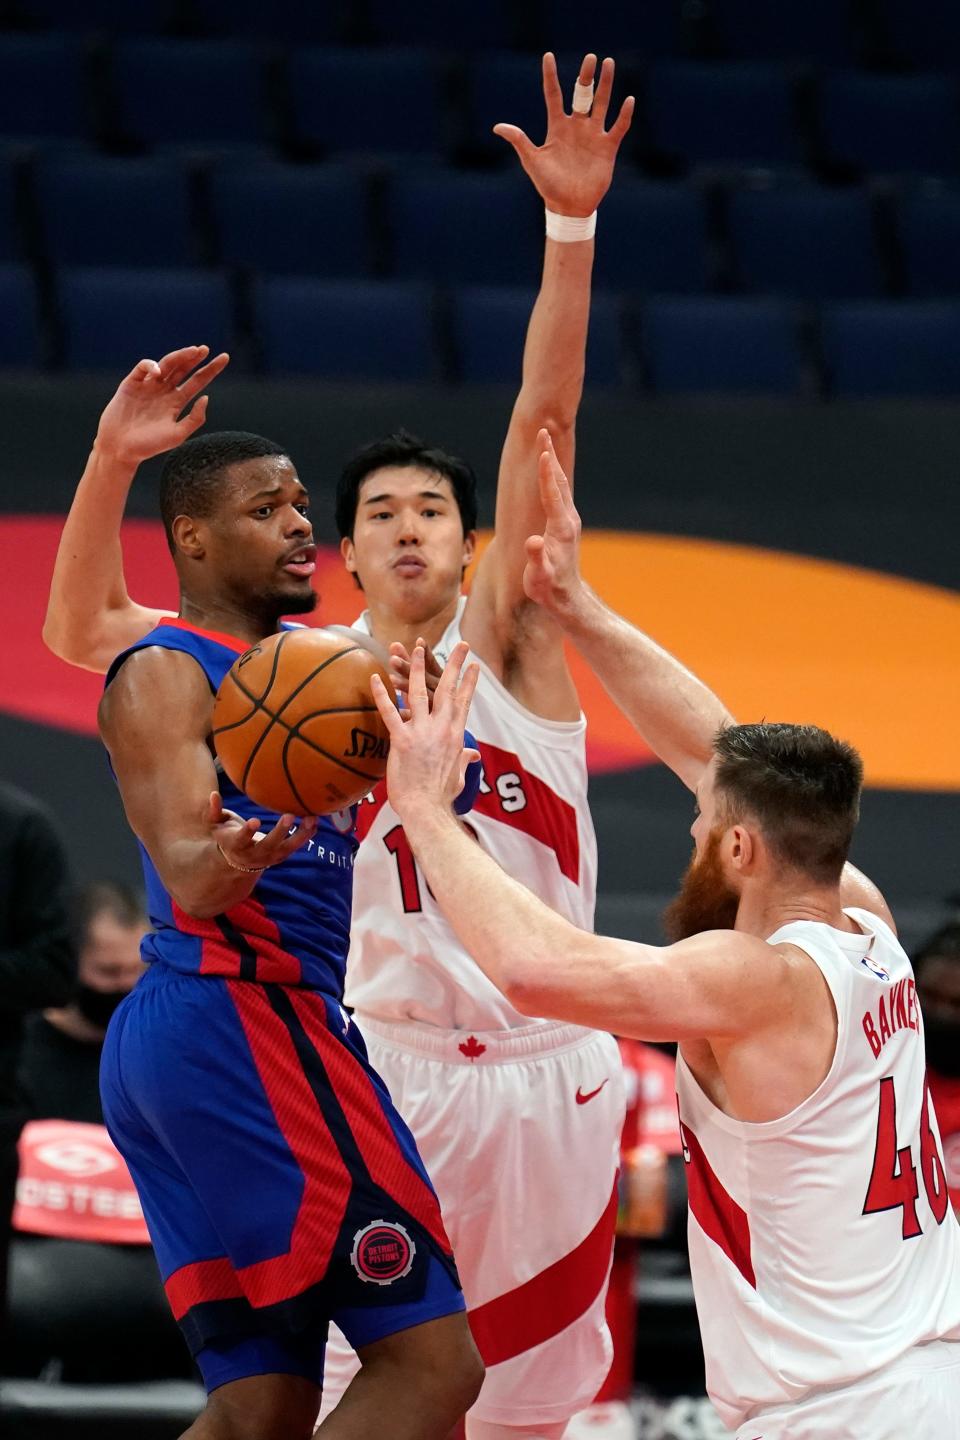 Pistons guard Dennis Smith Jr. loses the ball as he tries to get around Raptors forward Yuta Watanabe, center, and center Aron Baynes during the first half in Tampa, Florida, on Wednesday, March 3, 2021.